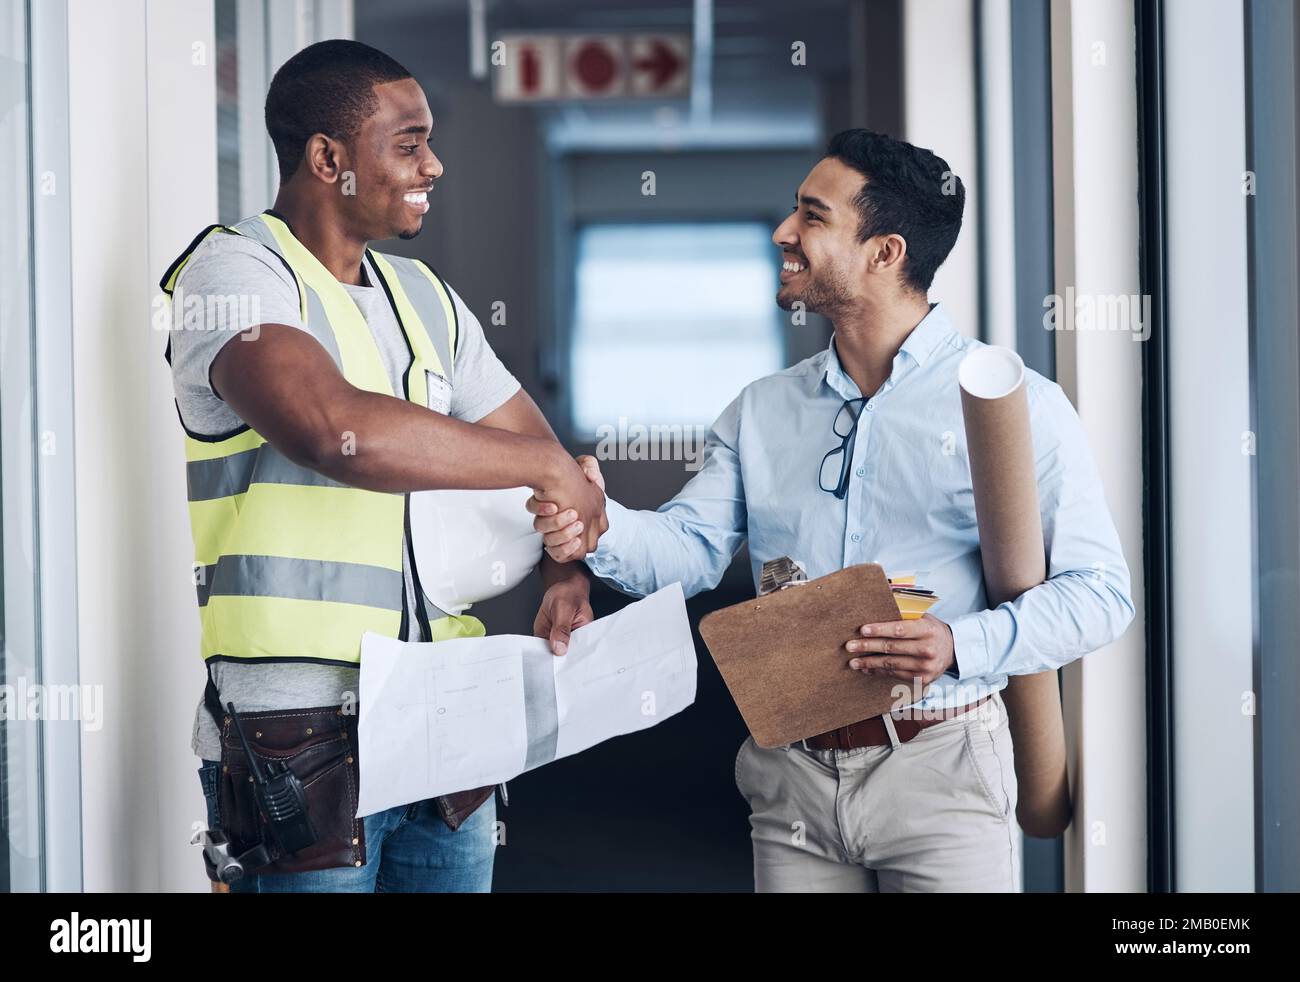 I cant wait to see your work. two young architects standing together and shaking hands after a discussion about the room before they renovate. Stock Photo